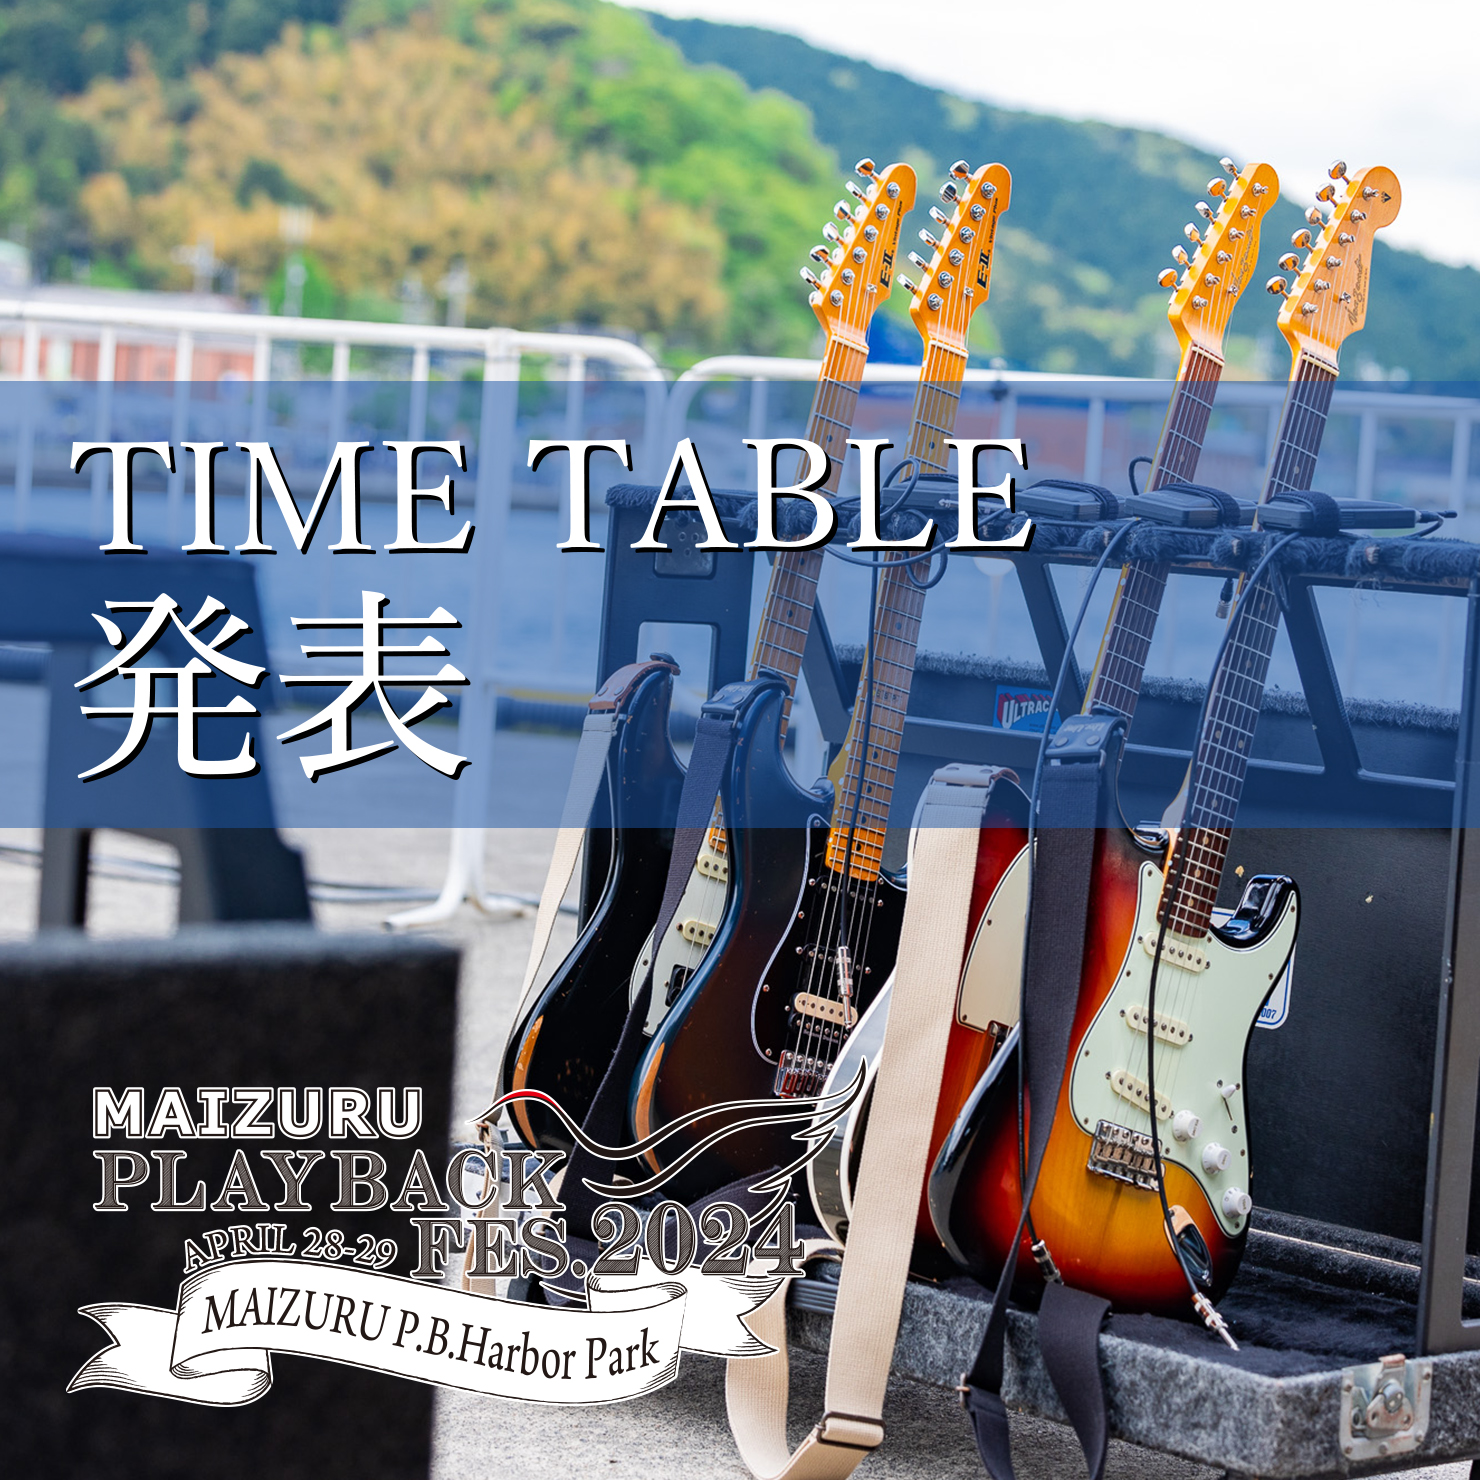 TIME TABLE 発表！！！